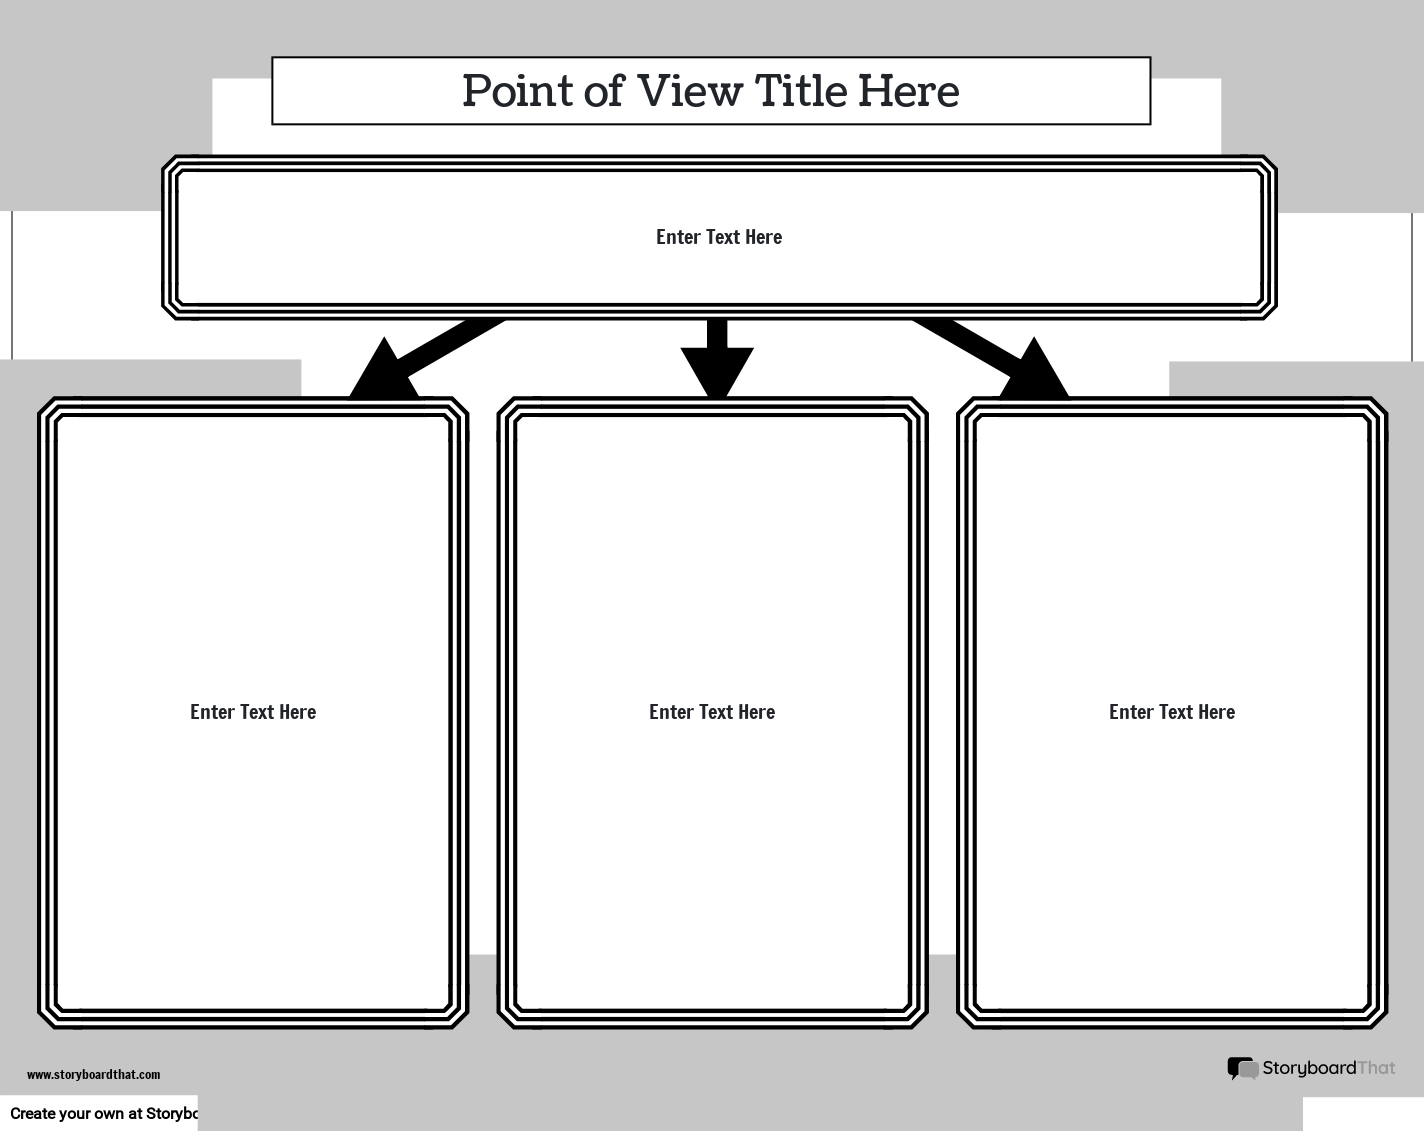 New Create Page Point of View Template 2 (Black & White)